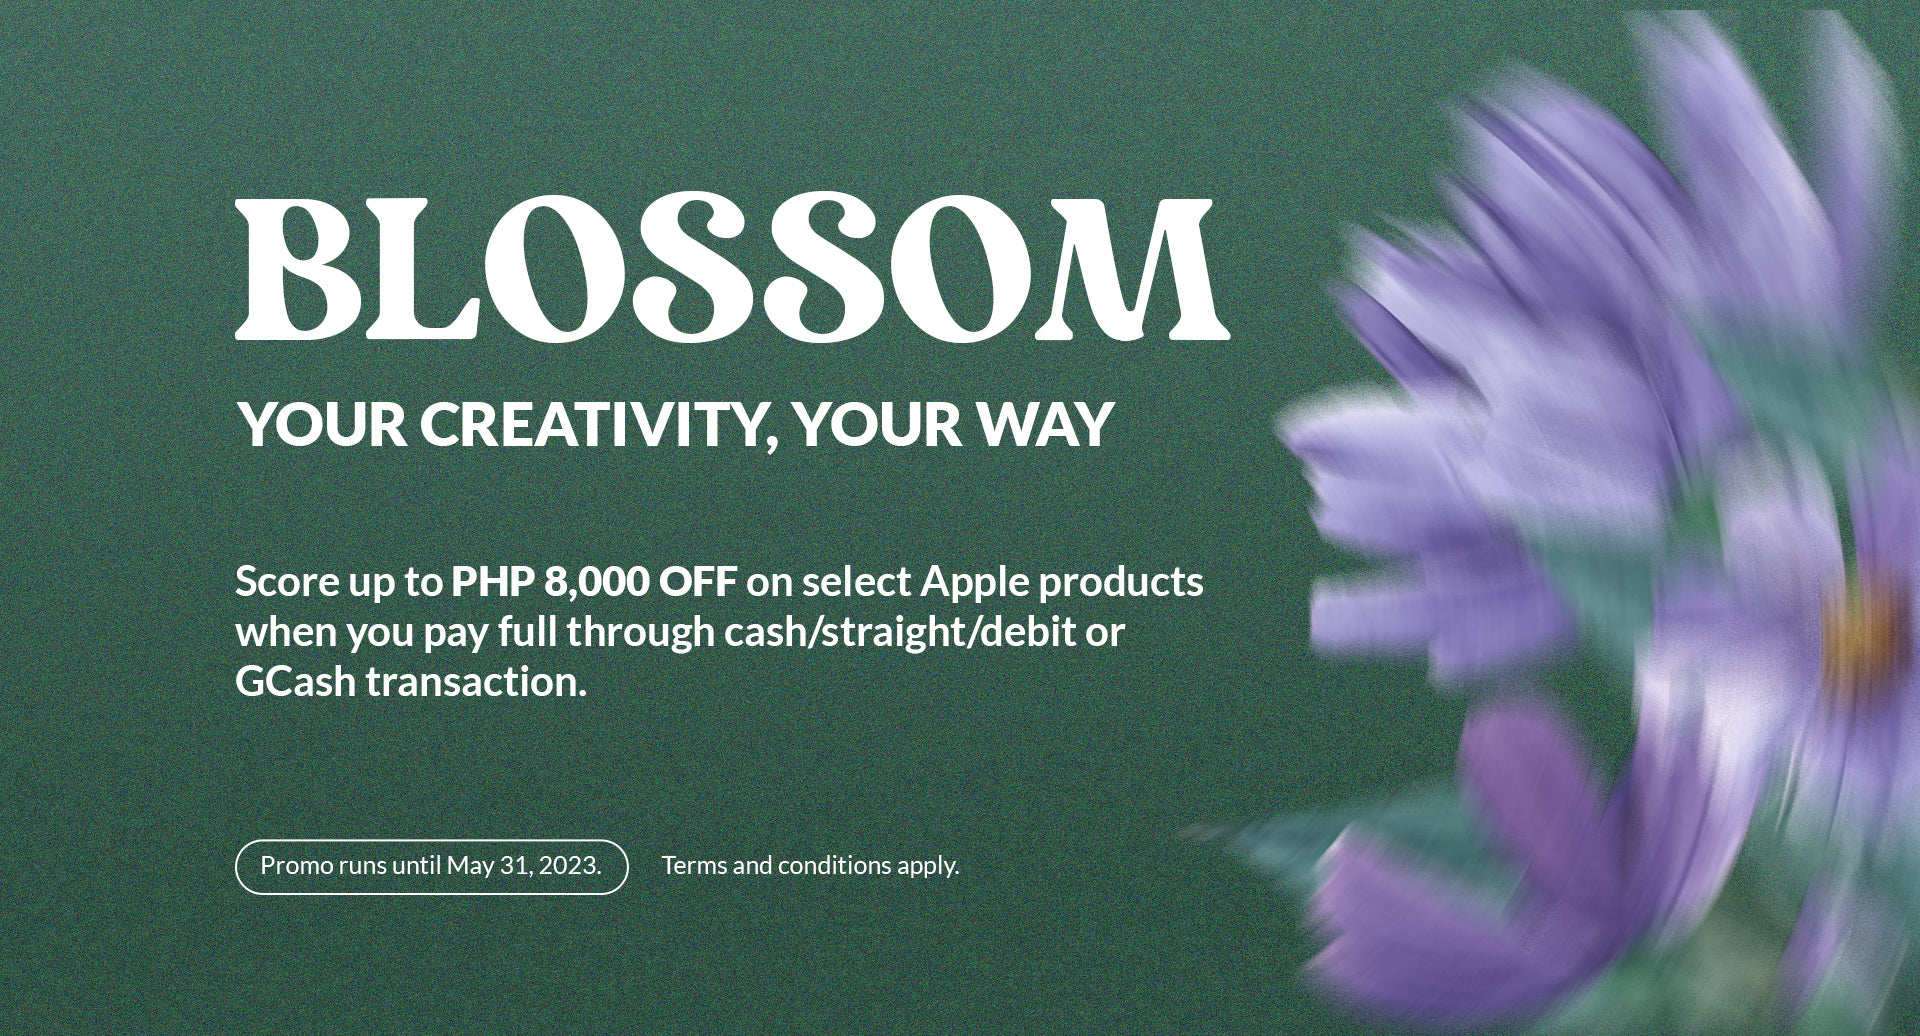 Blossom your creativity, your way! Score up to PHP8,000 off on select Apple products.